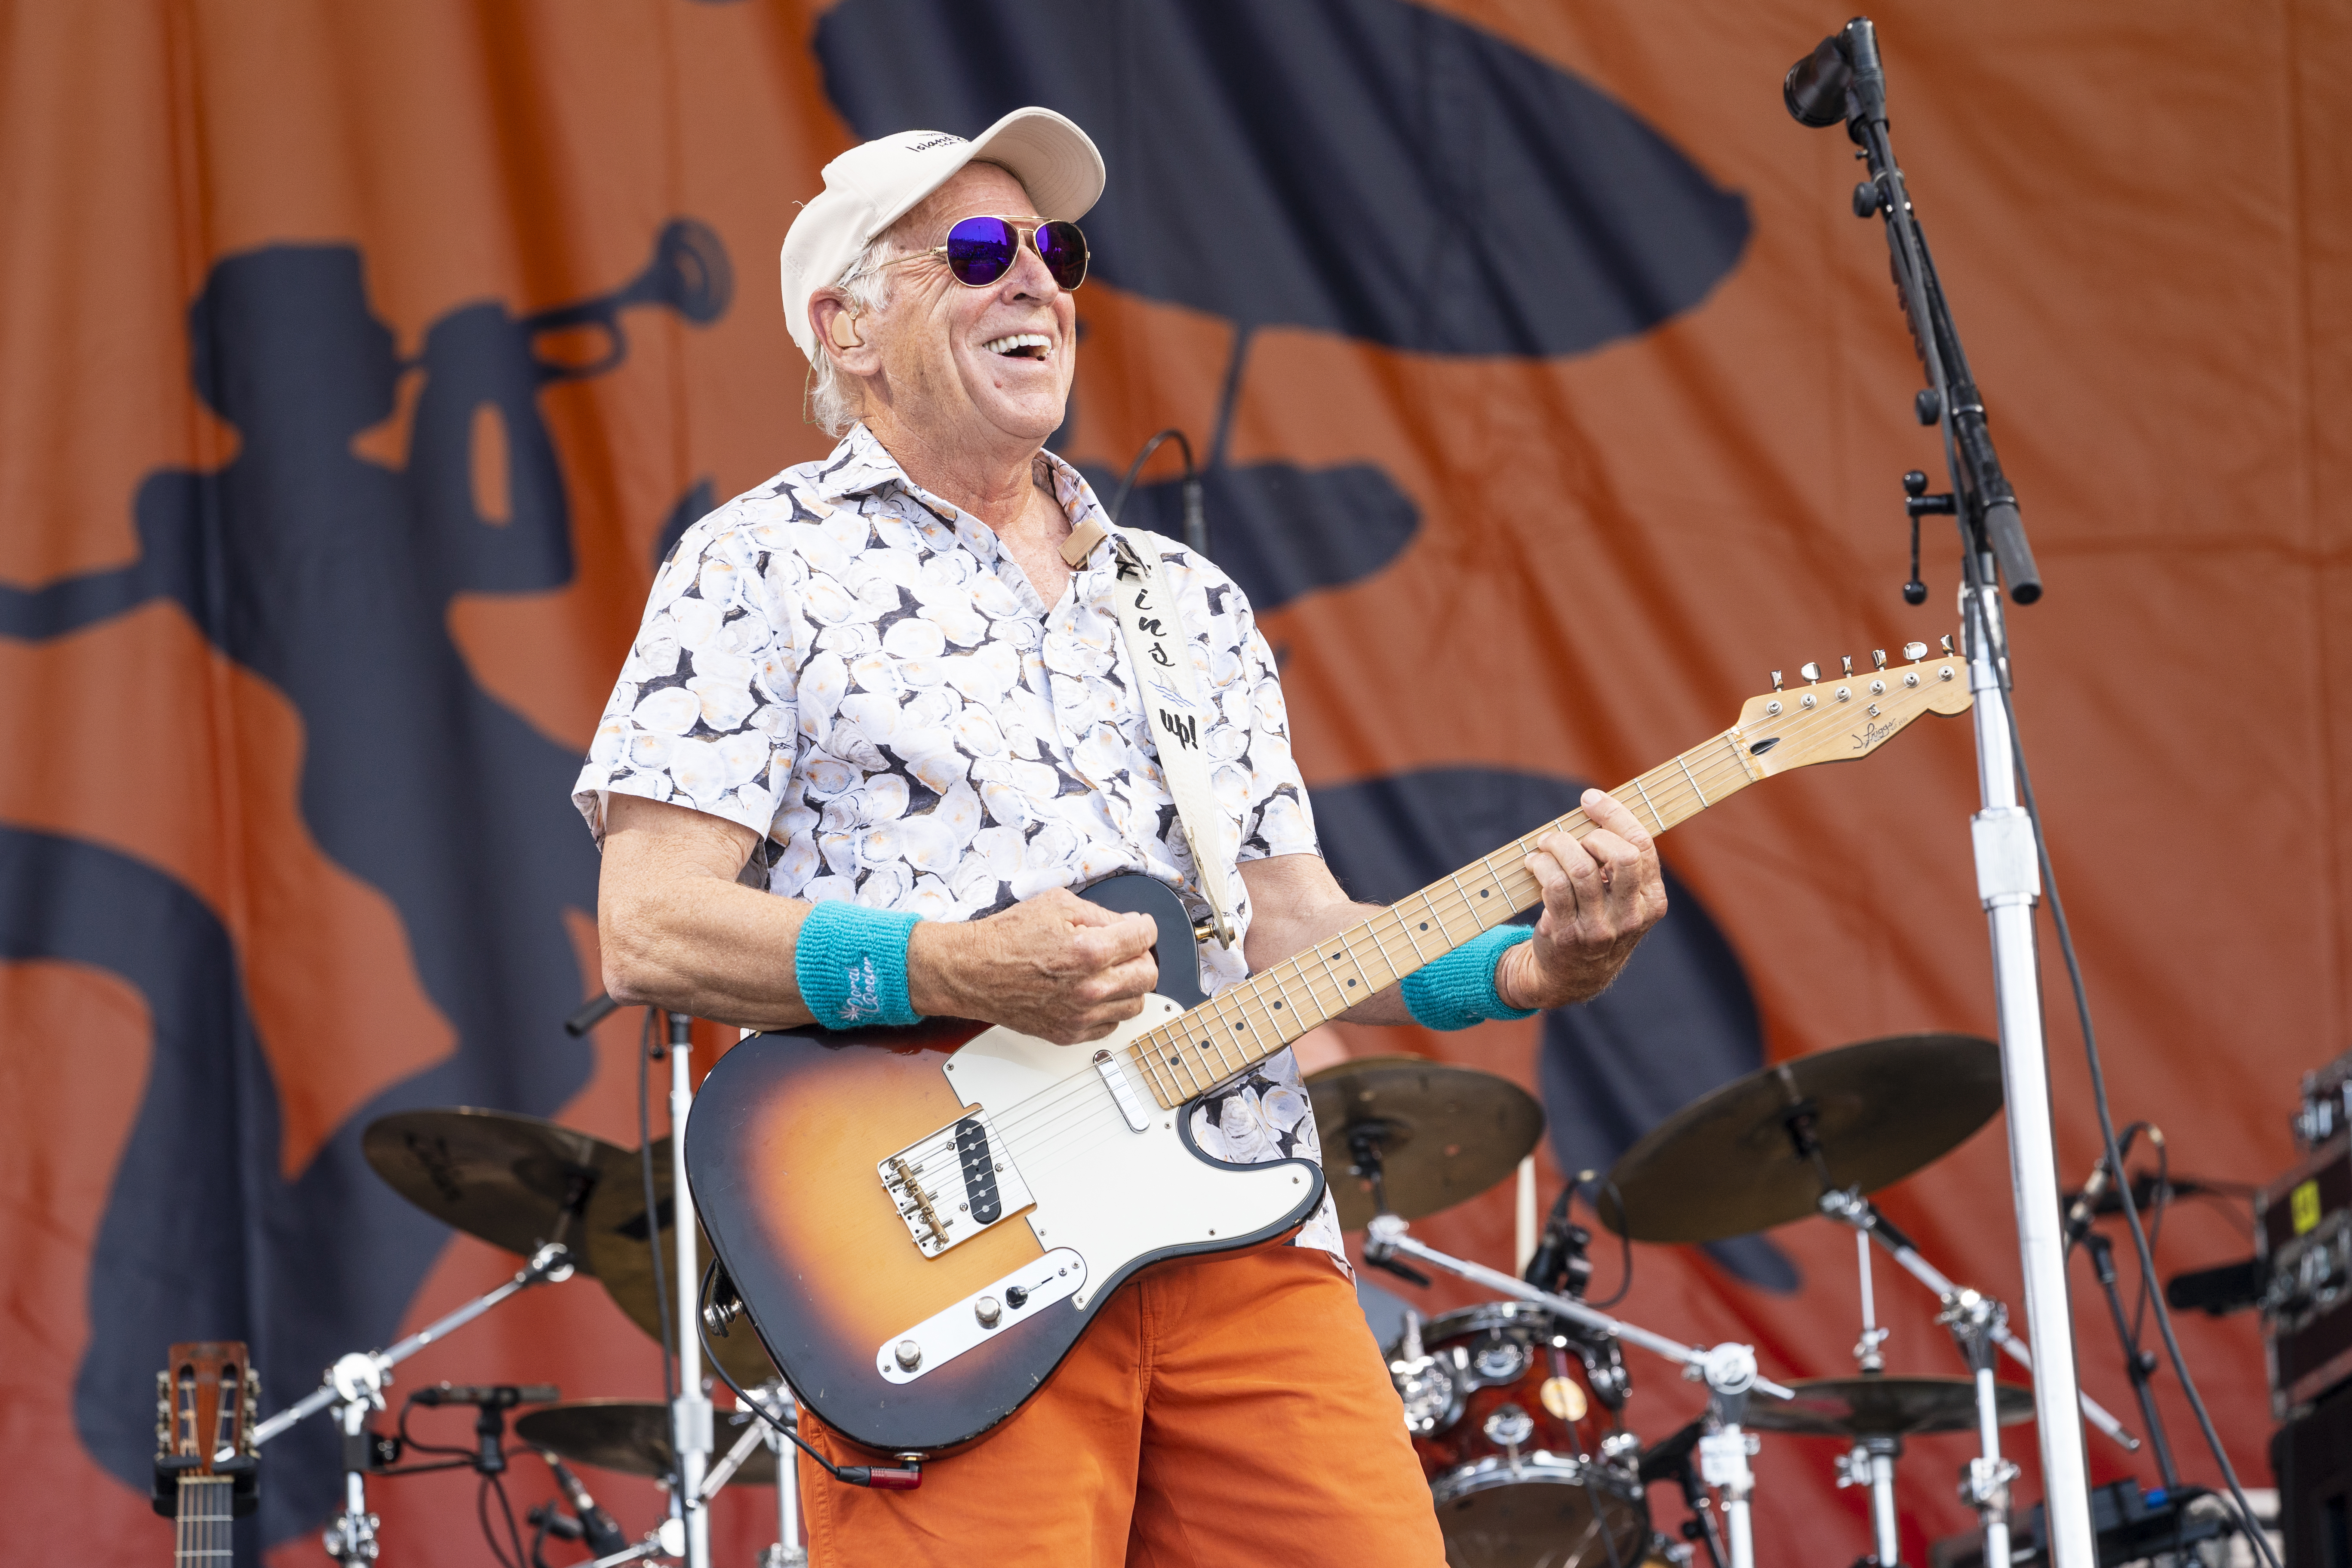 NEW ORLEANS, LOUISIANA - MAY 08: Jimmy Buffett performs during 2022 New Orleans Jazz & Heritage Festival at Fair Grounds Race Course on May 08, 2022 in New Orleans, Louisiana.